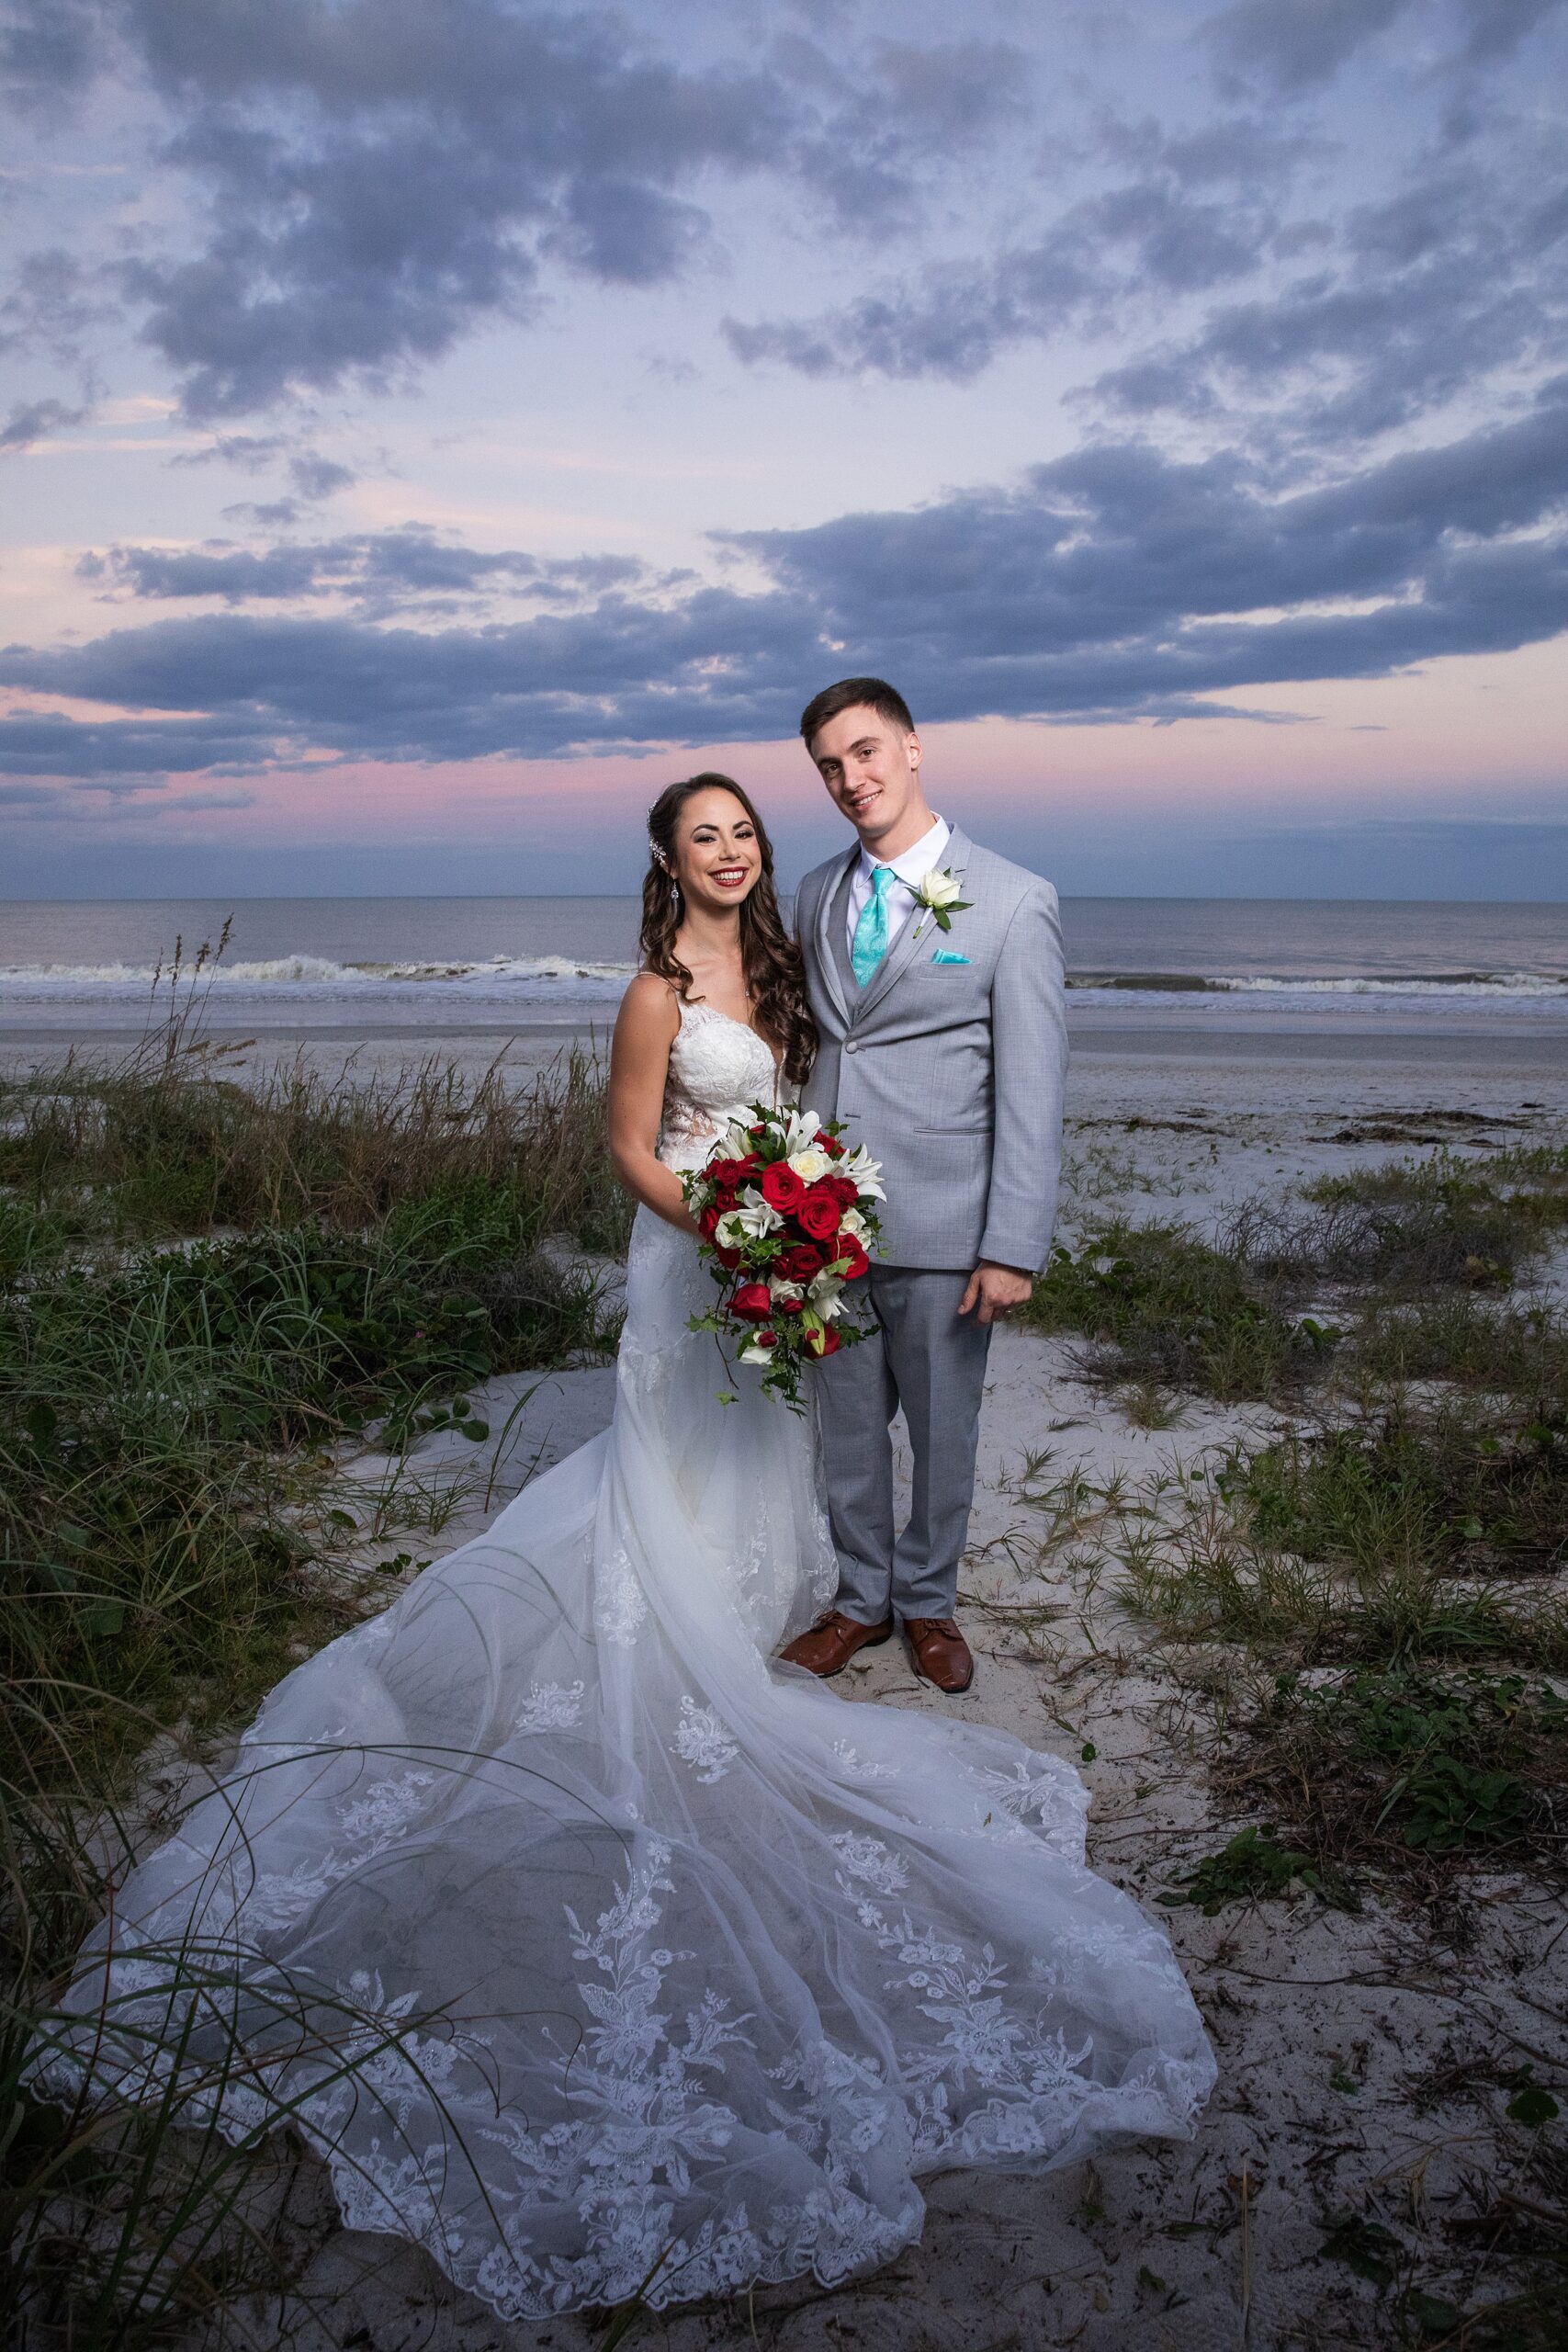 Newlyweds stand in the dunes of the lodge and club ponte verda wedding venue holding each other and the large red and white rose bouquet